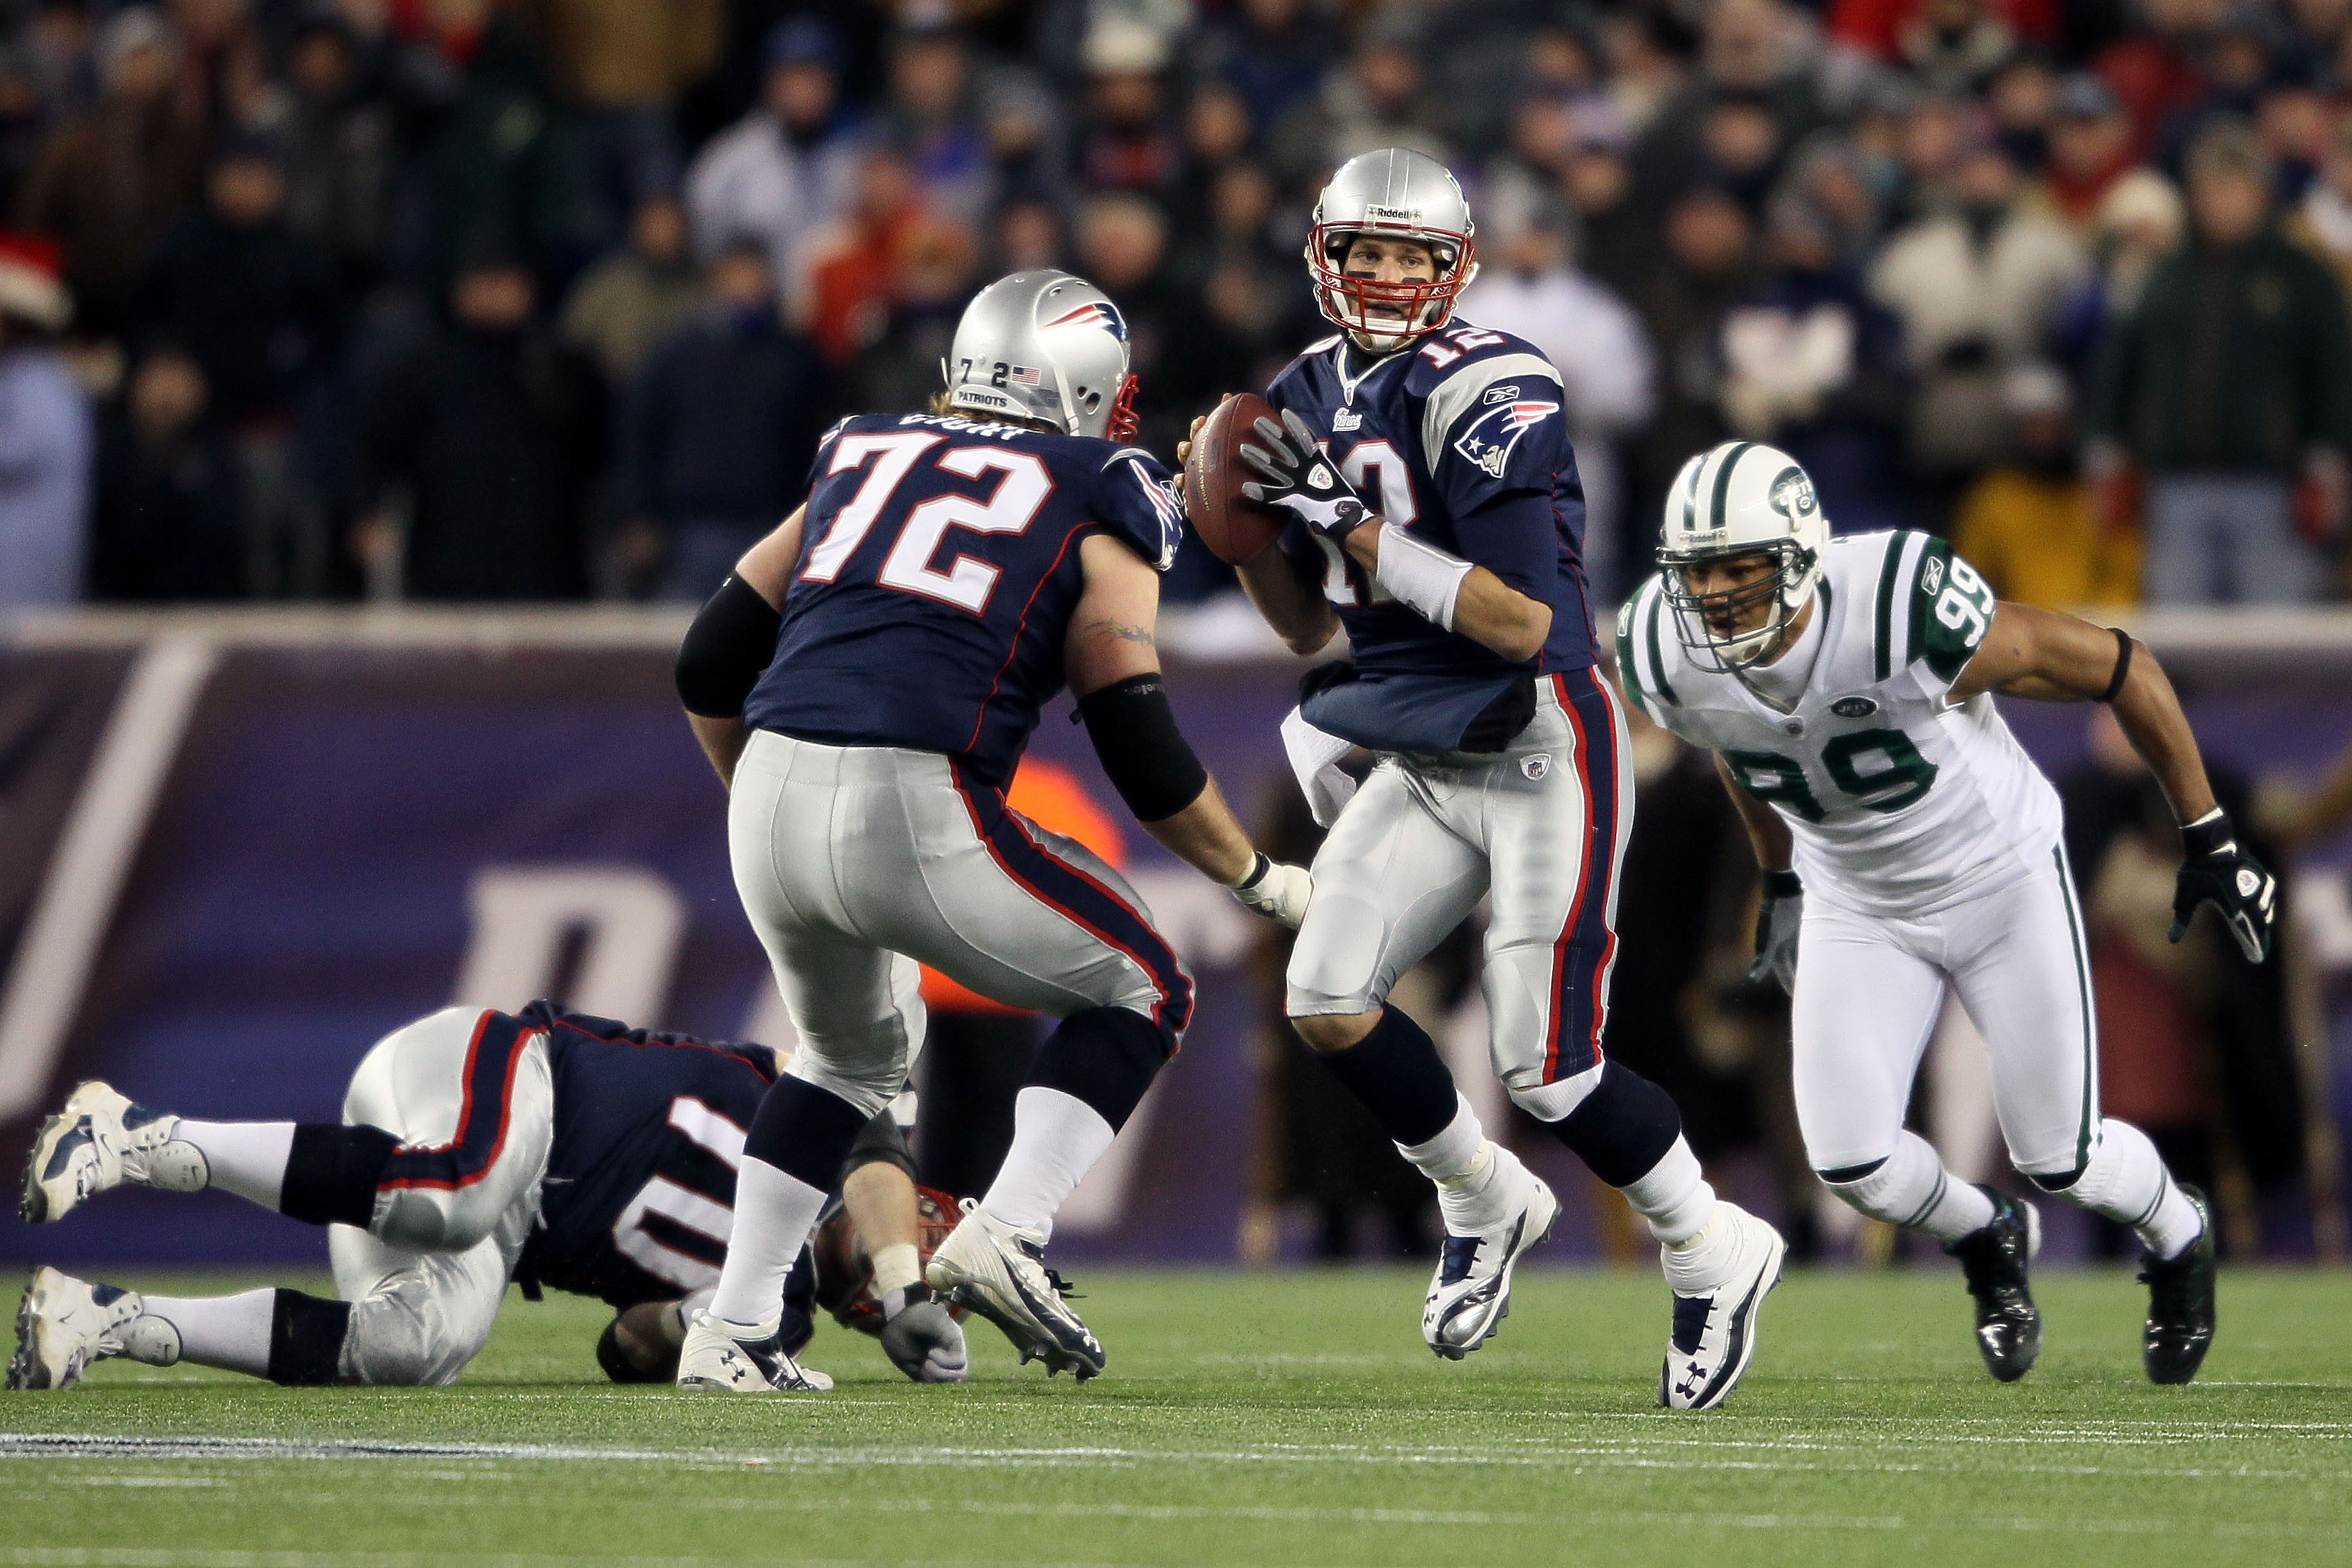 FOXBORO, MA - DECEMBER 06:  Tom Brady #12 of the New England Patriots looks to pass against the New York Jets at Gillette Stadium on December 6, 2010 in Foxboro, Massachusetts.  (Photo by Elsa/Getty Images)